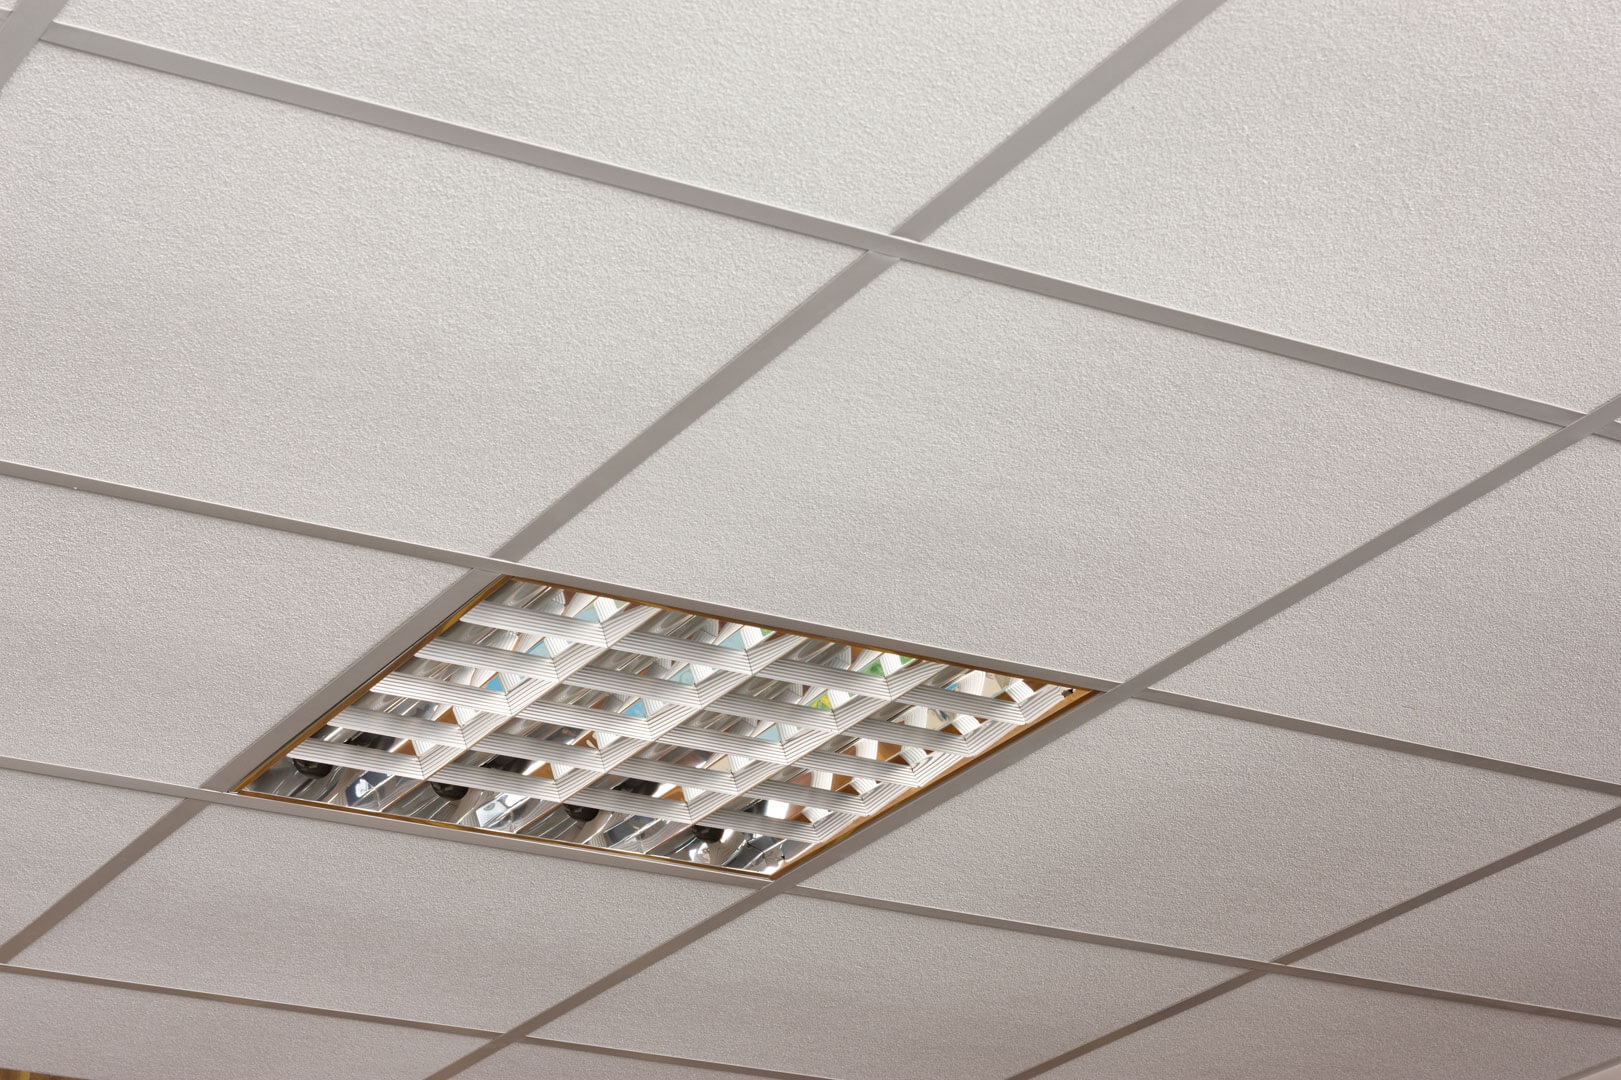 Permalink to Armstrong Cortega 600×600 Suspended Ceiling Tiles